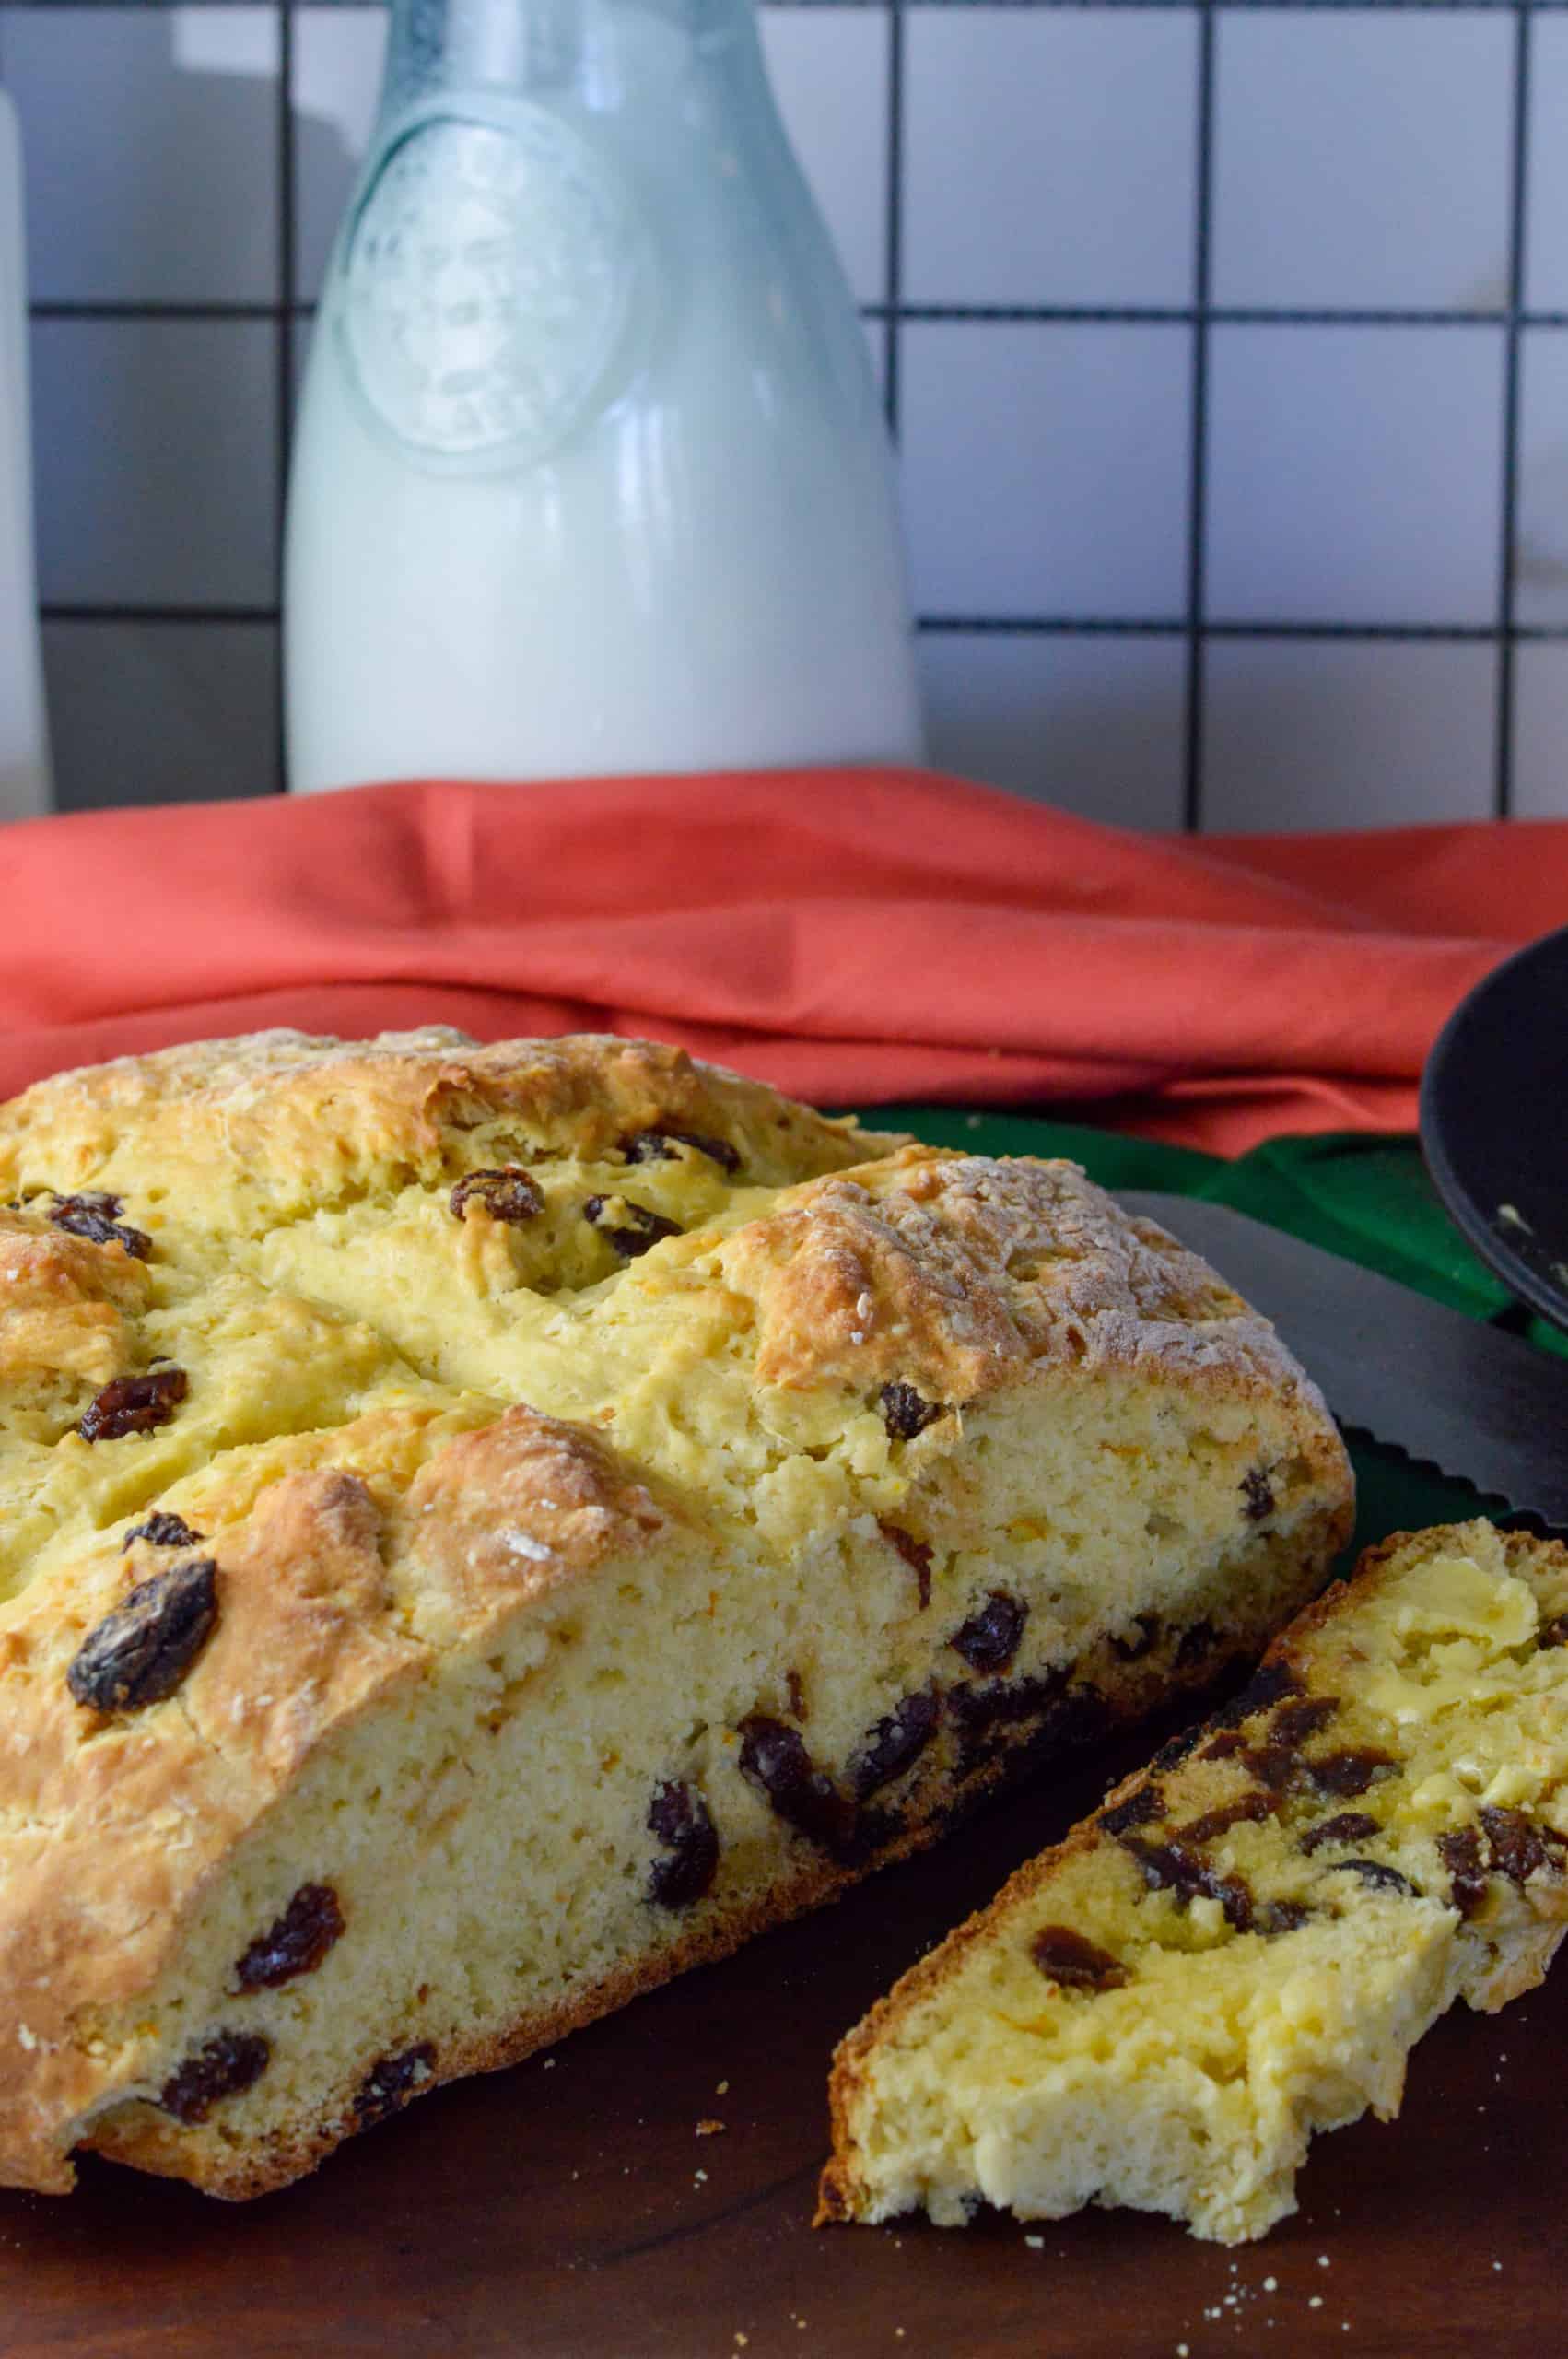 Bread loaf with raisins with slice cut off and buttered, orange and green napkins and buttermilk in background